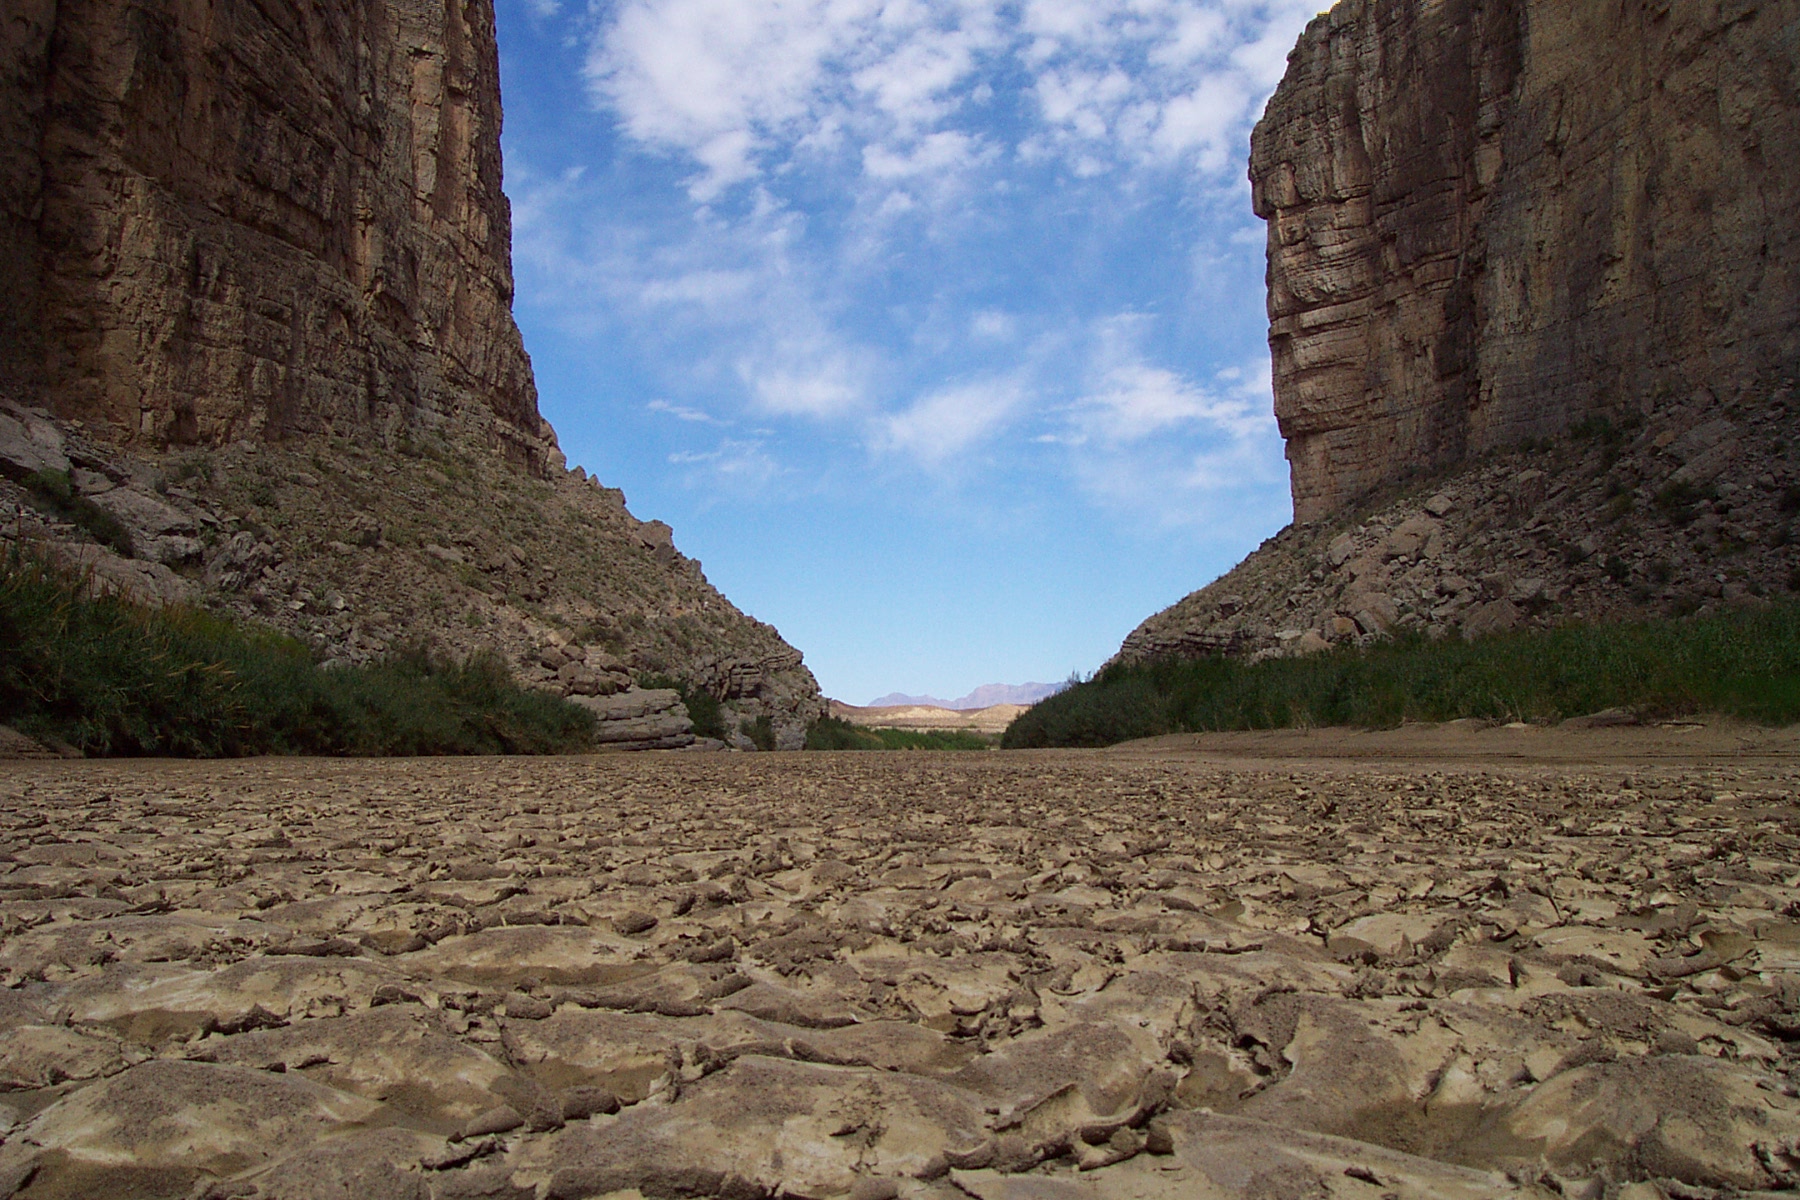 File:Big Bend National Park - Rio Grande riverbed with cracked mud.jpg - Wikipedia, the free ...